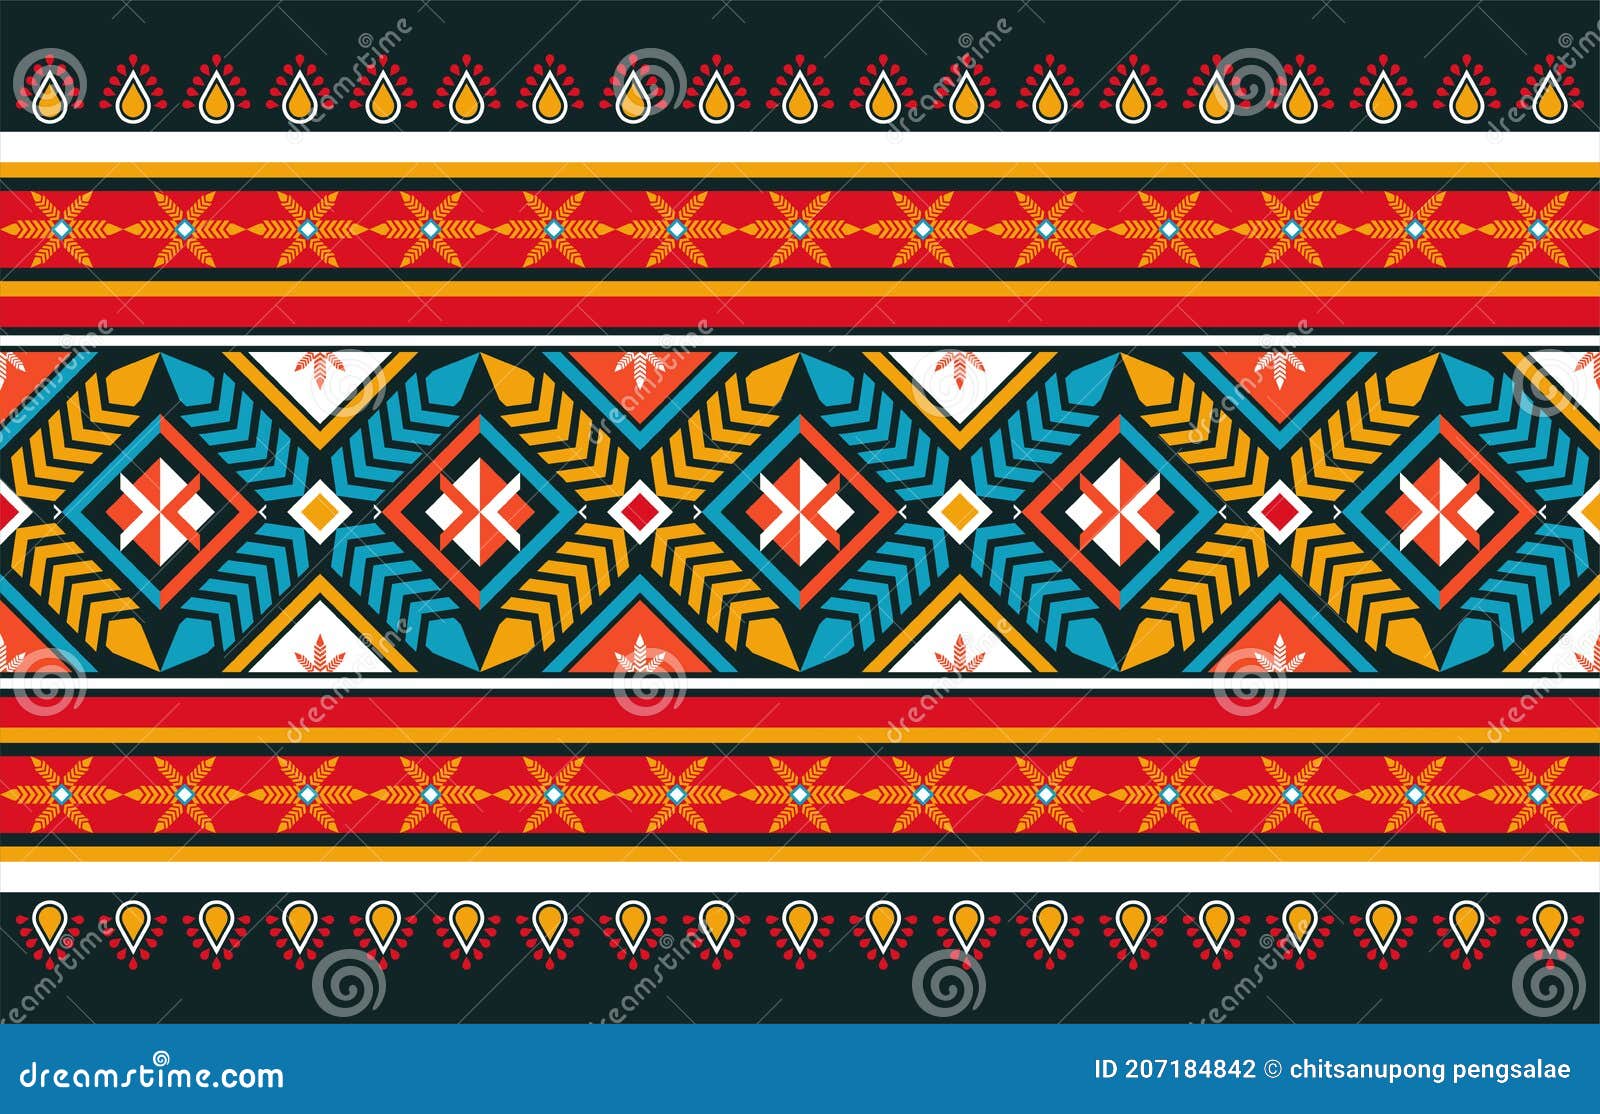 Abstract Orange and Red Geometric Native Pattern Seamless Vector ...